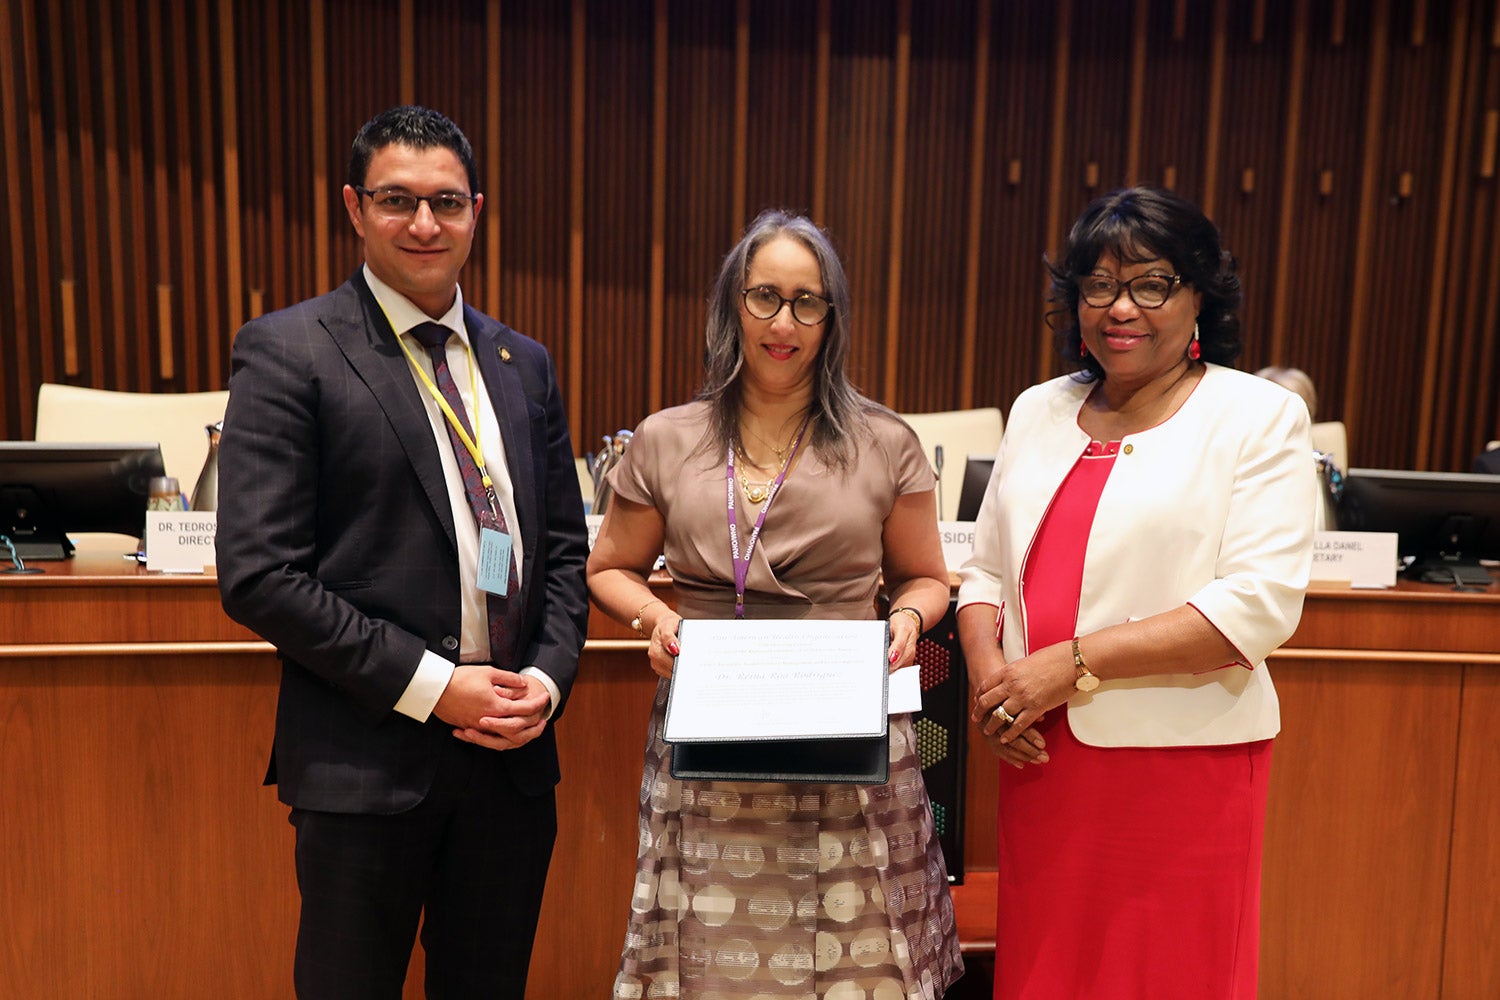 Dr. Reina Roa Rodriguez of Panama was recognized with the PAHO Award for Health Services Management and Leadership